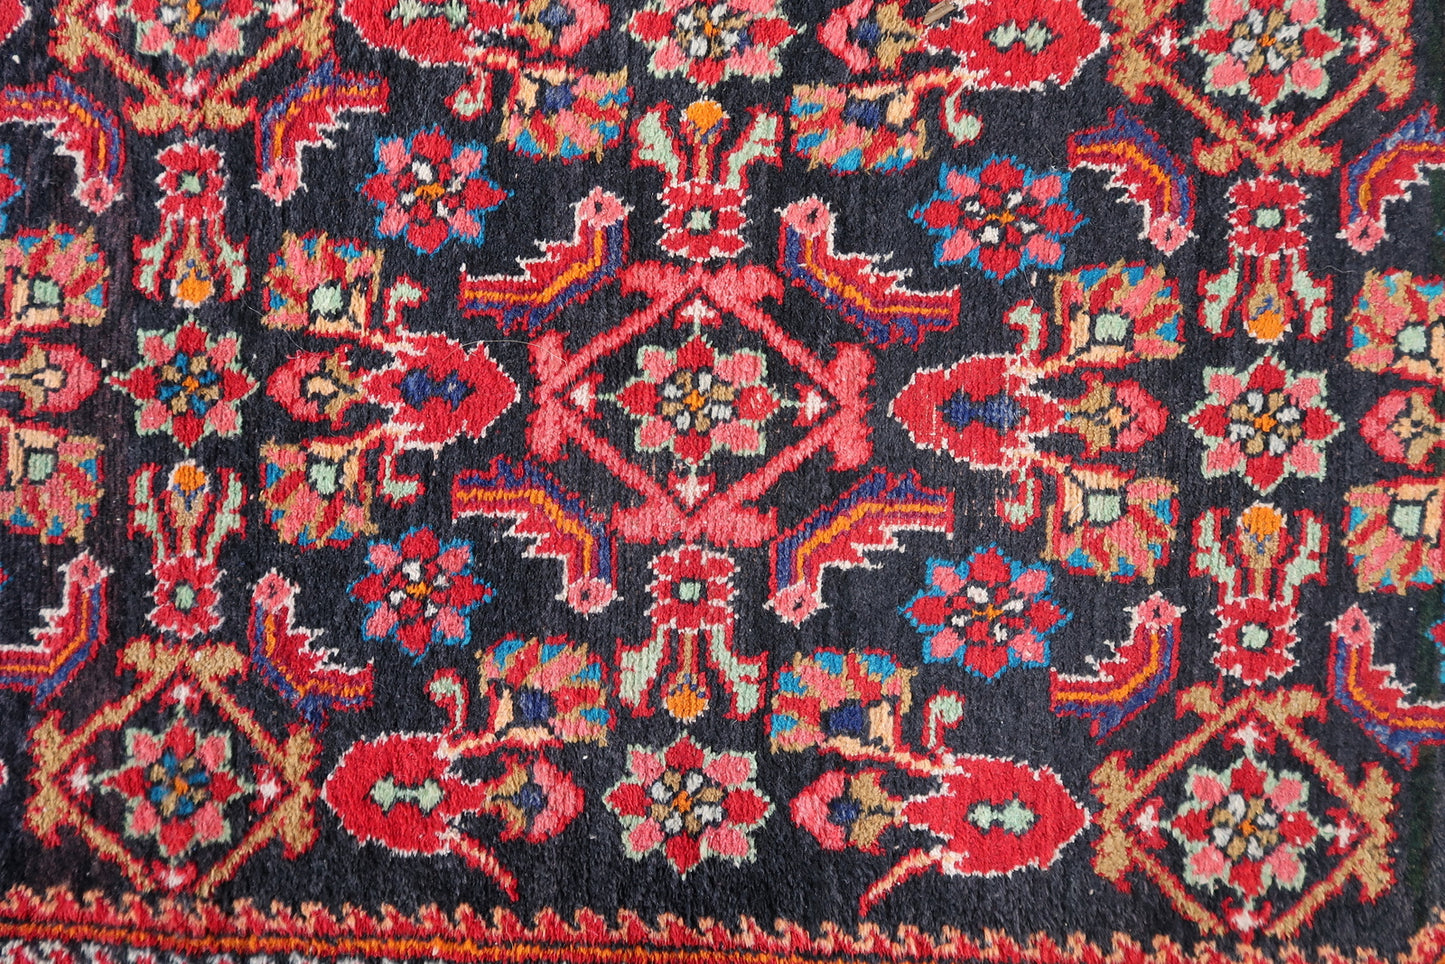 Close-up of rug's corner on Handmade Vintage Persian Hamadan Rug - Detailed view capturing the corner of the rug with its design.